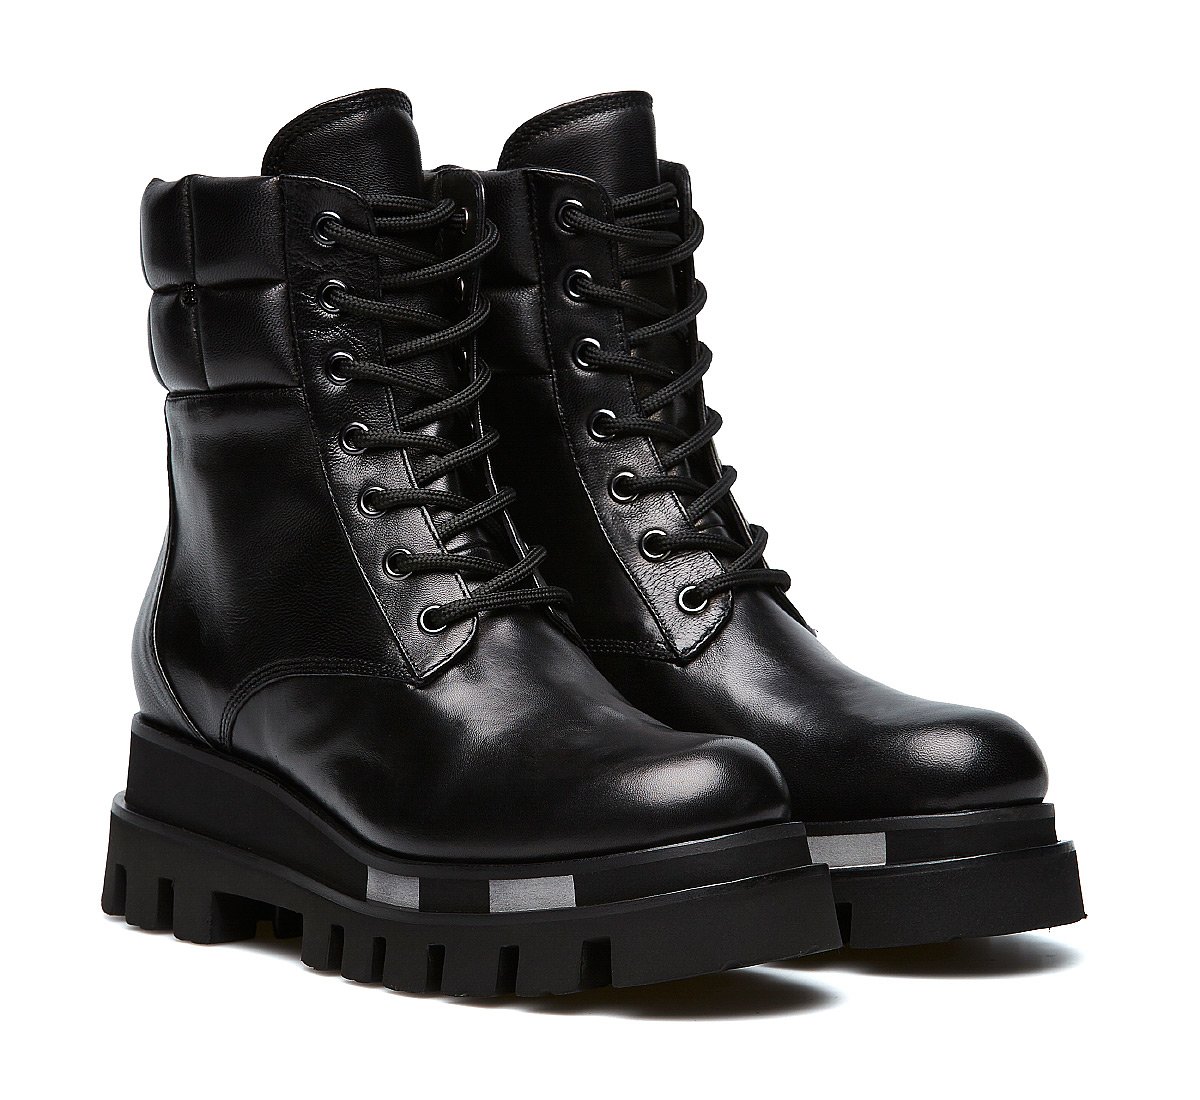 Soft nappa leather combat boots